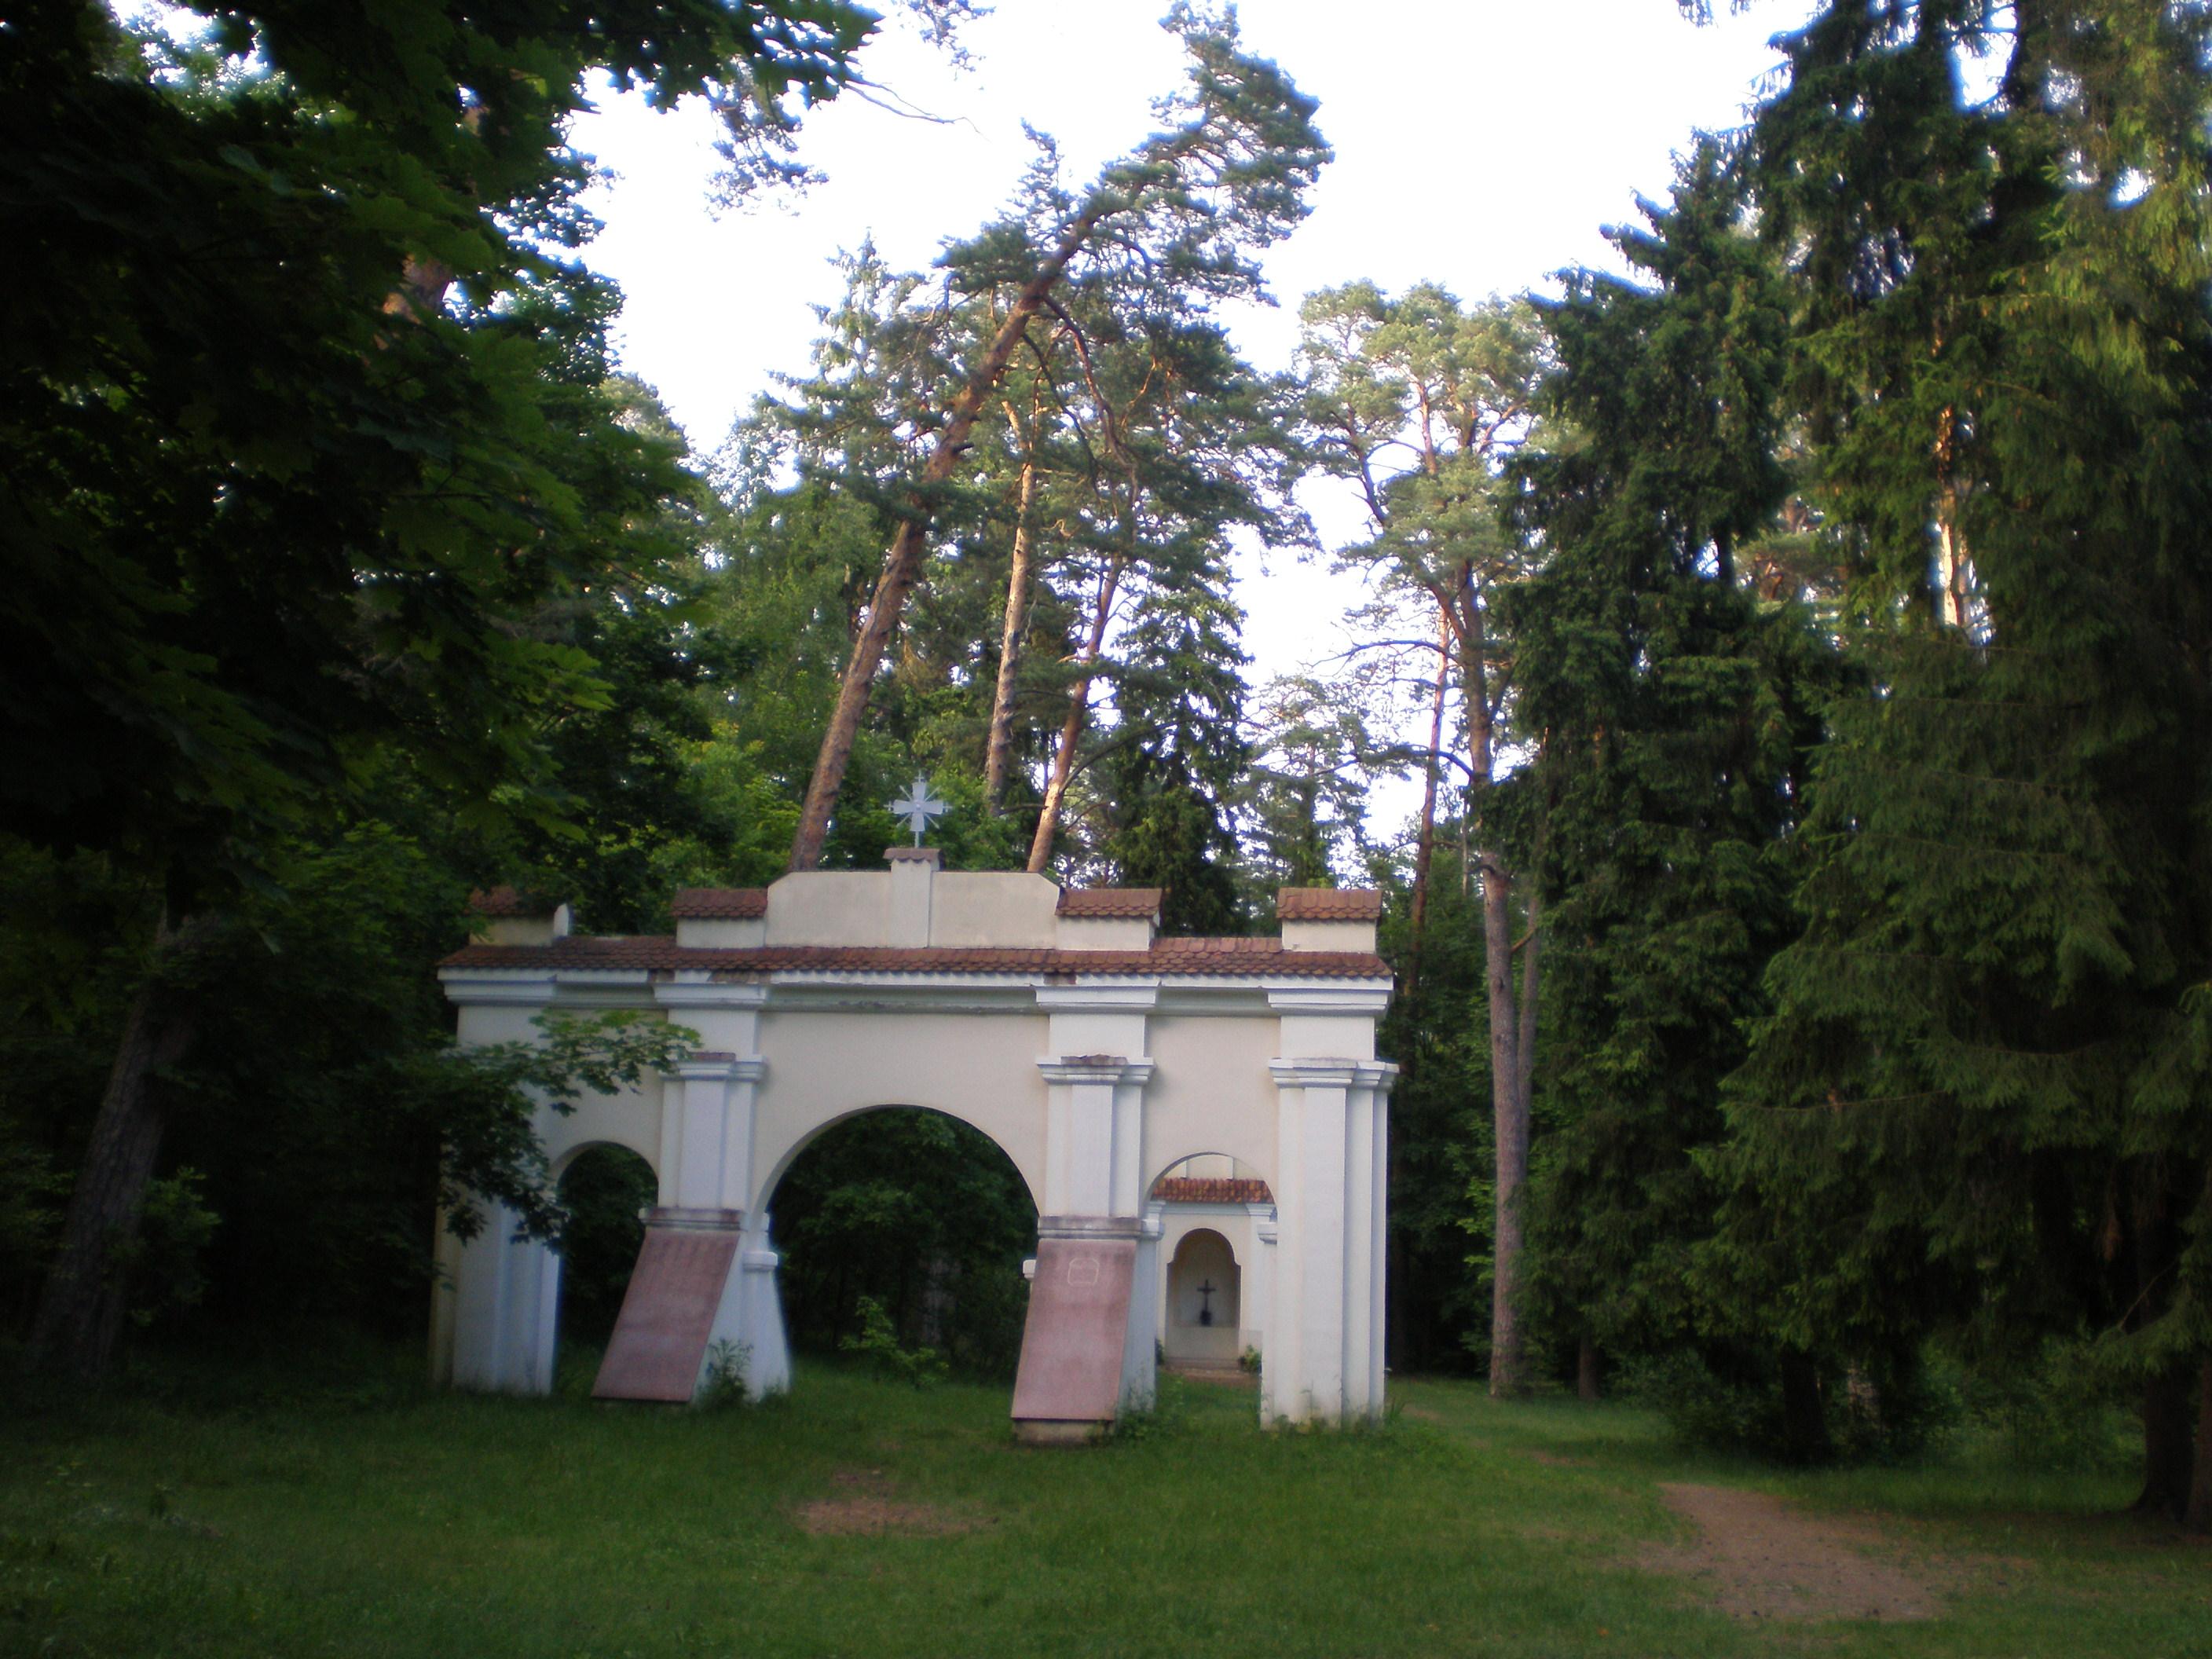 Cover image of this place The Way of the Cross of Vilnius Calvary